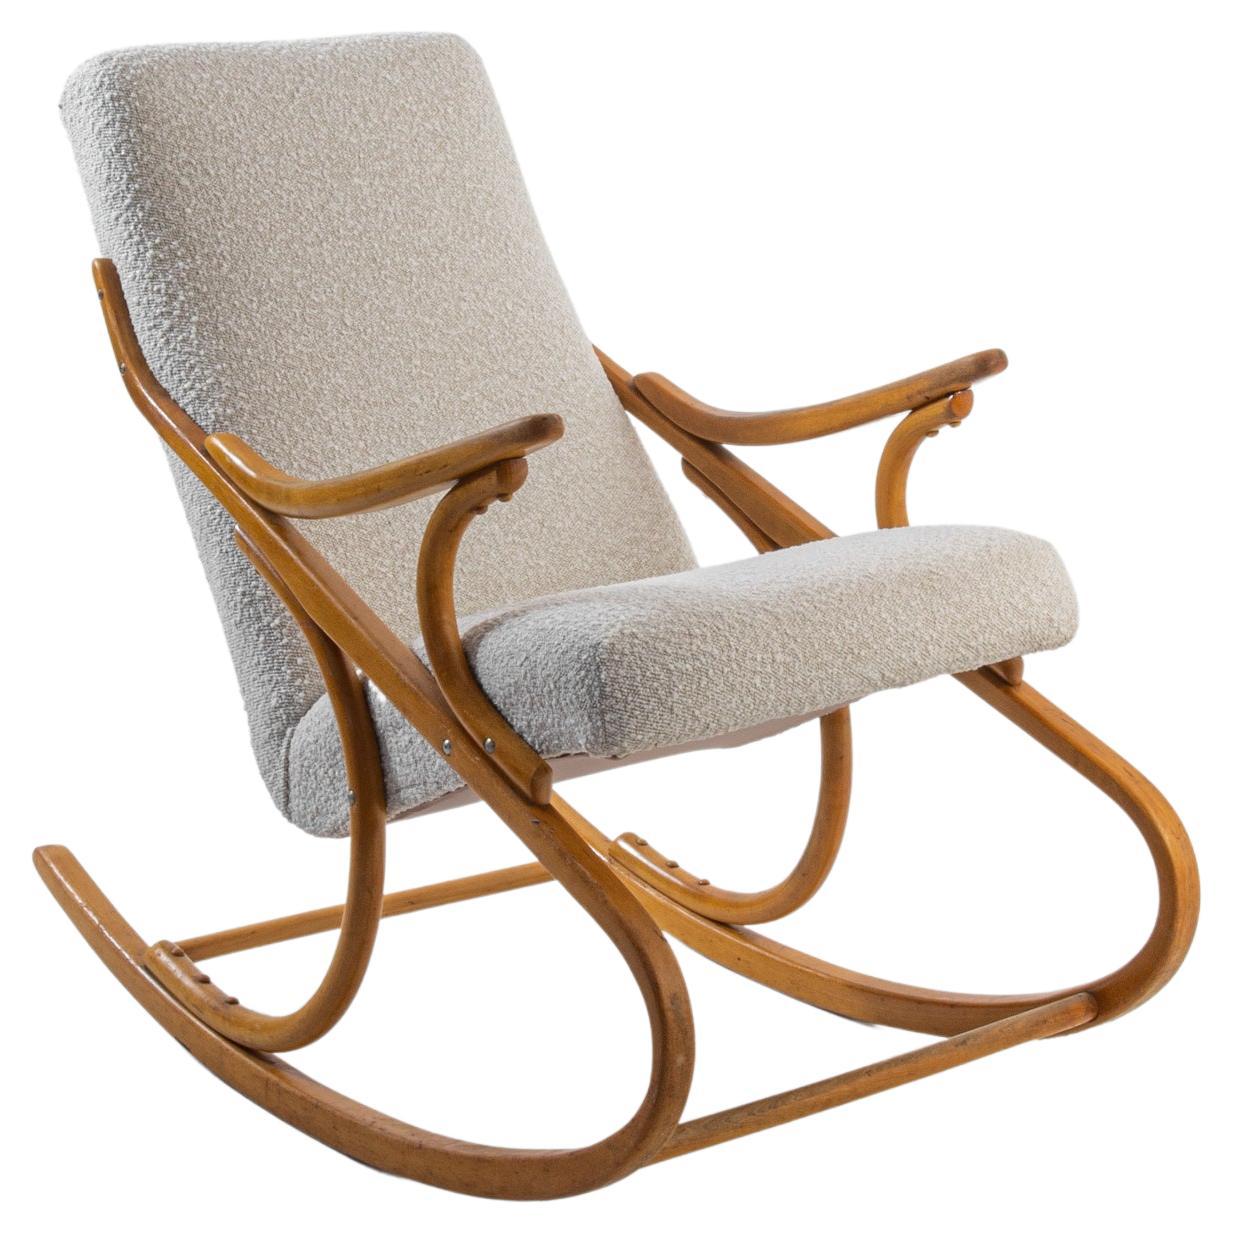 1960s Upholstered Bentwood Rocking Chair by TON